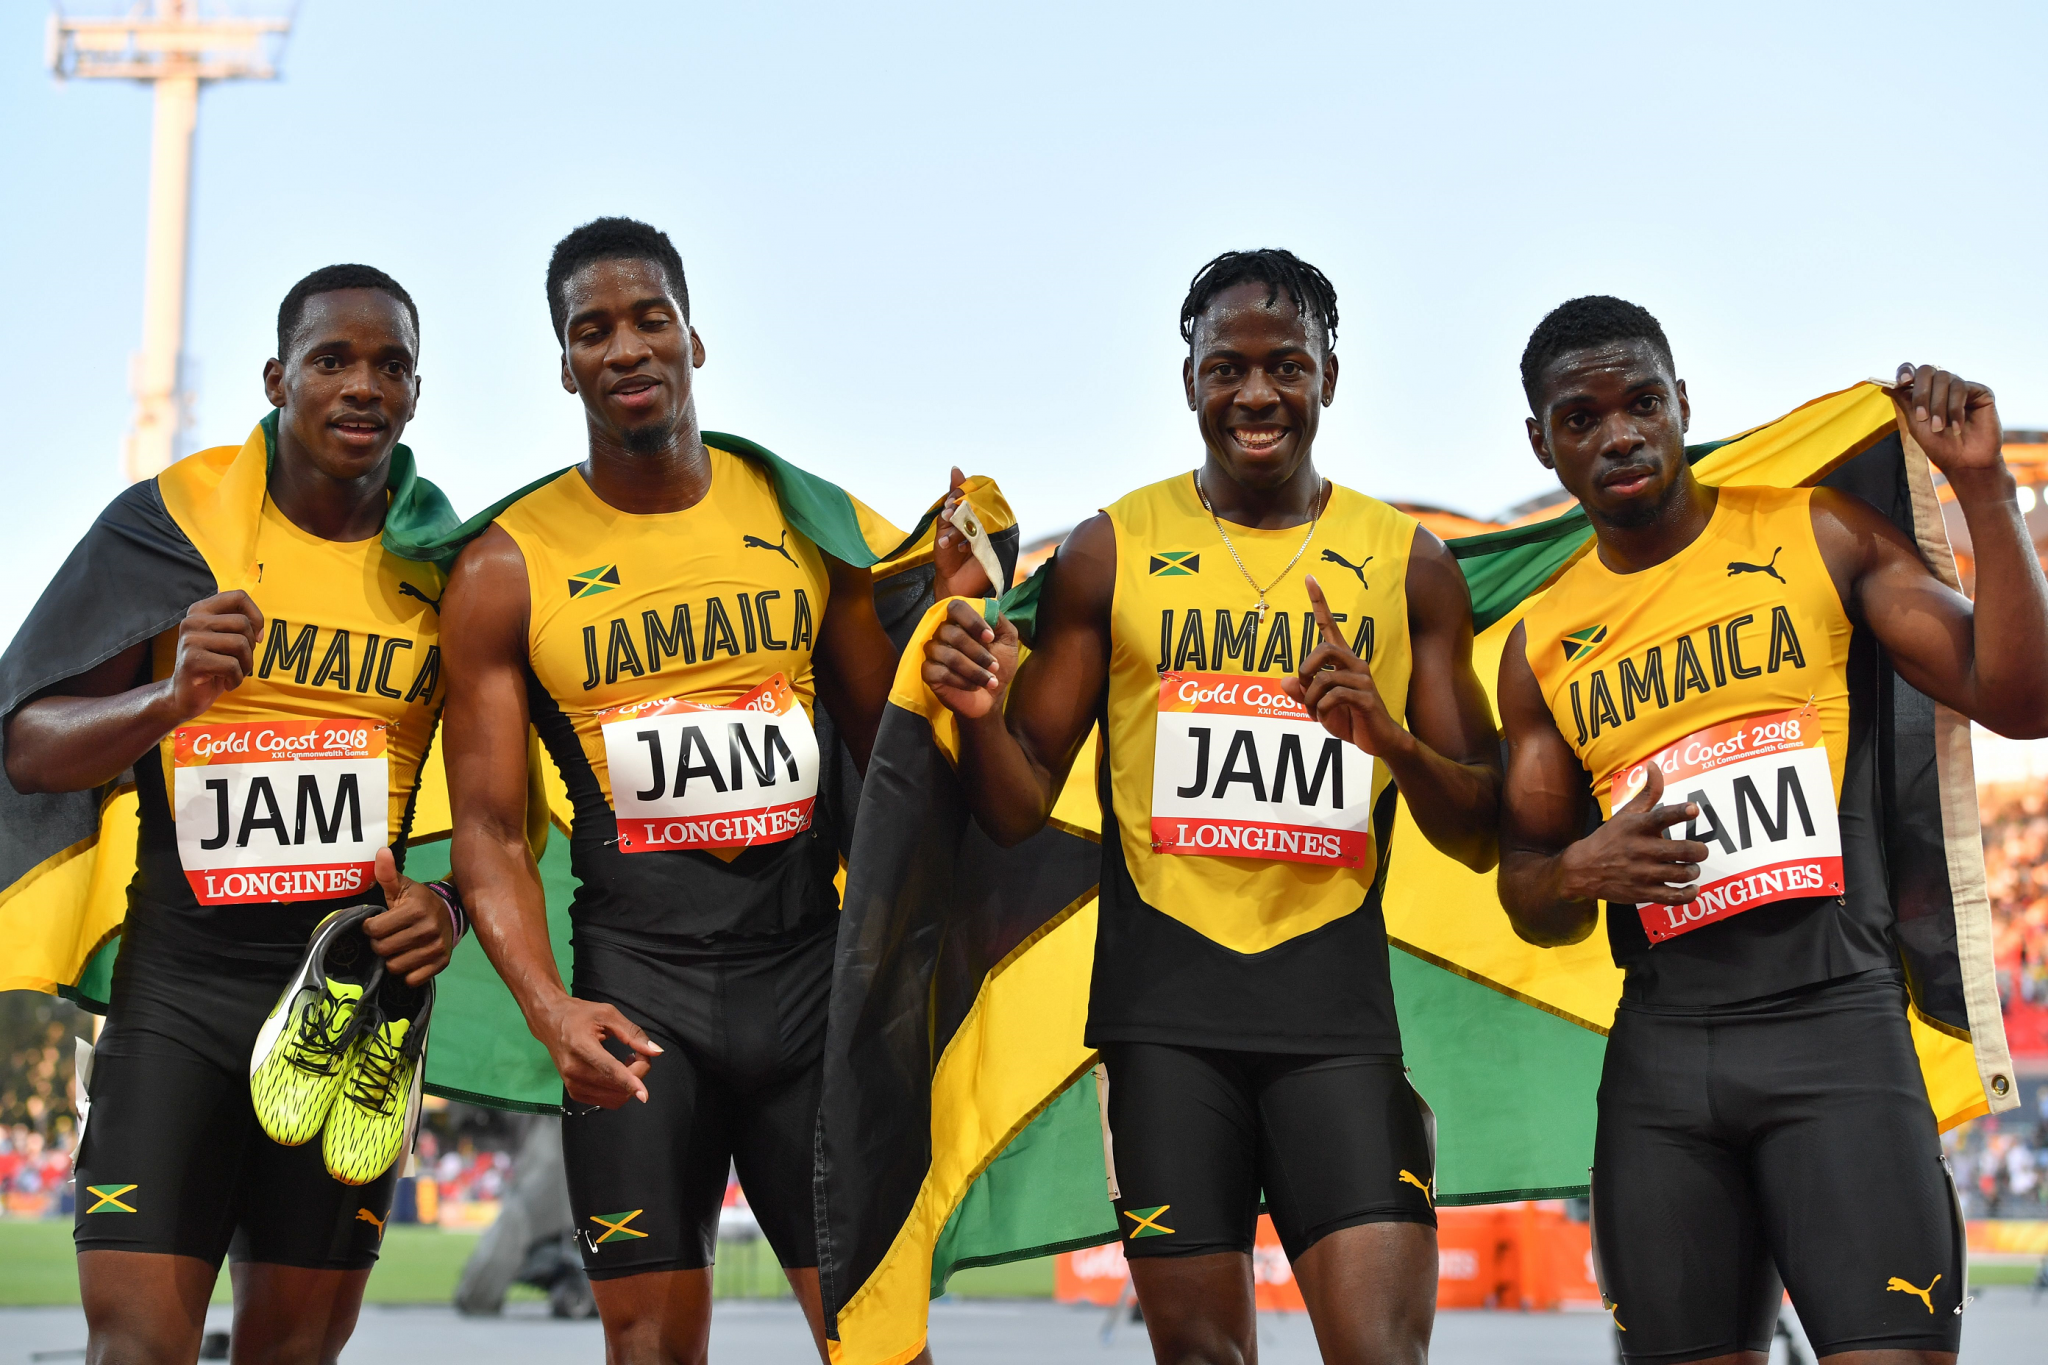 Jamaica were one of the strongest athletics teams at the 2018 Commonwealth Games and 2019 World Championships ©Getty Images